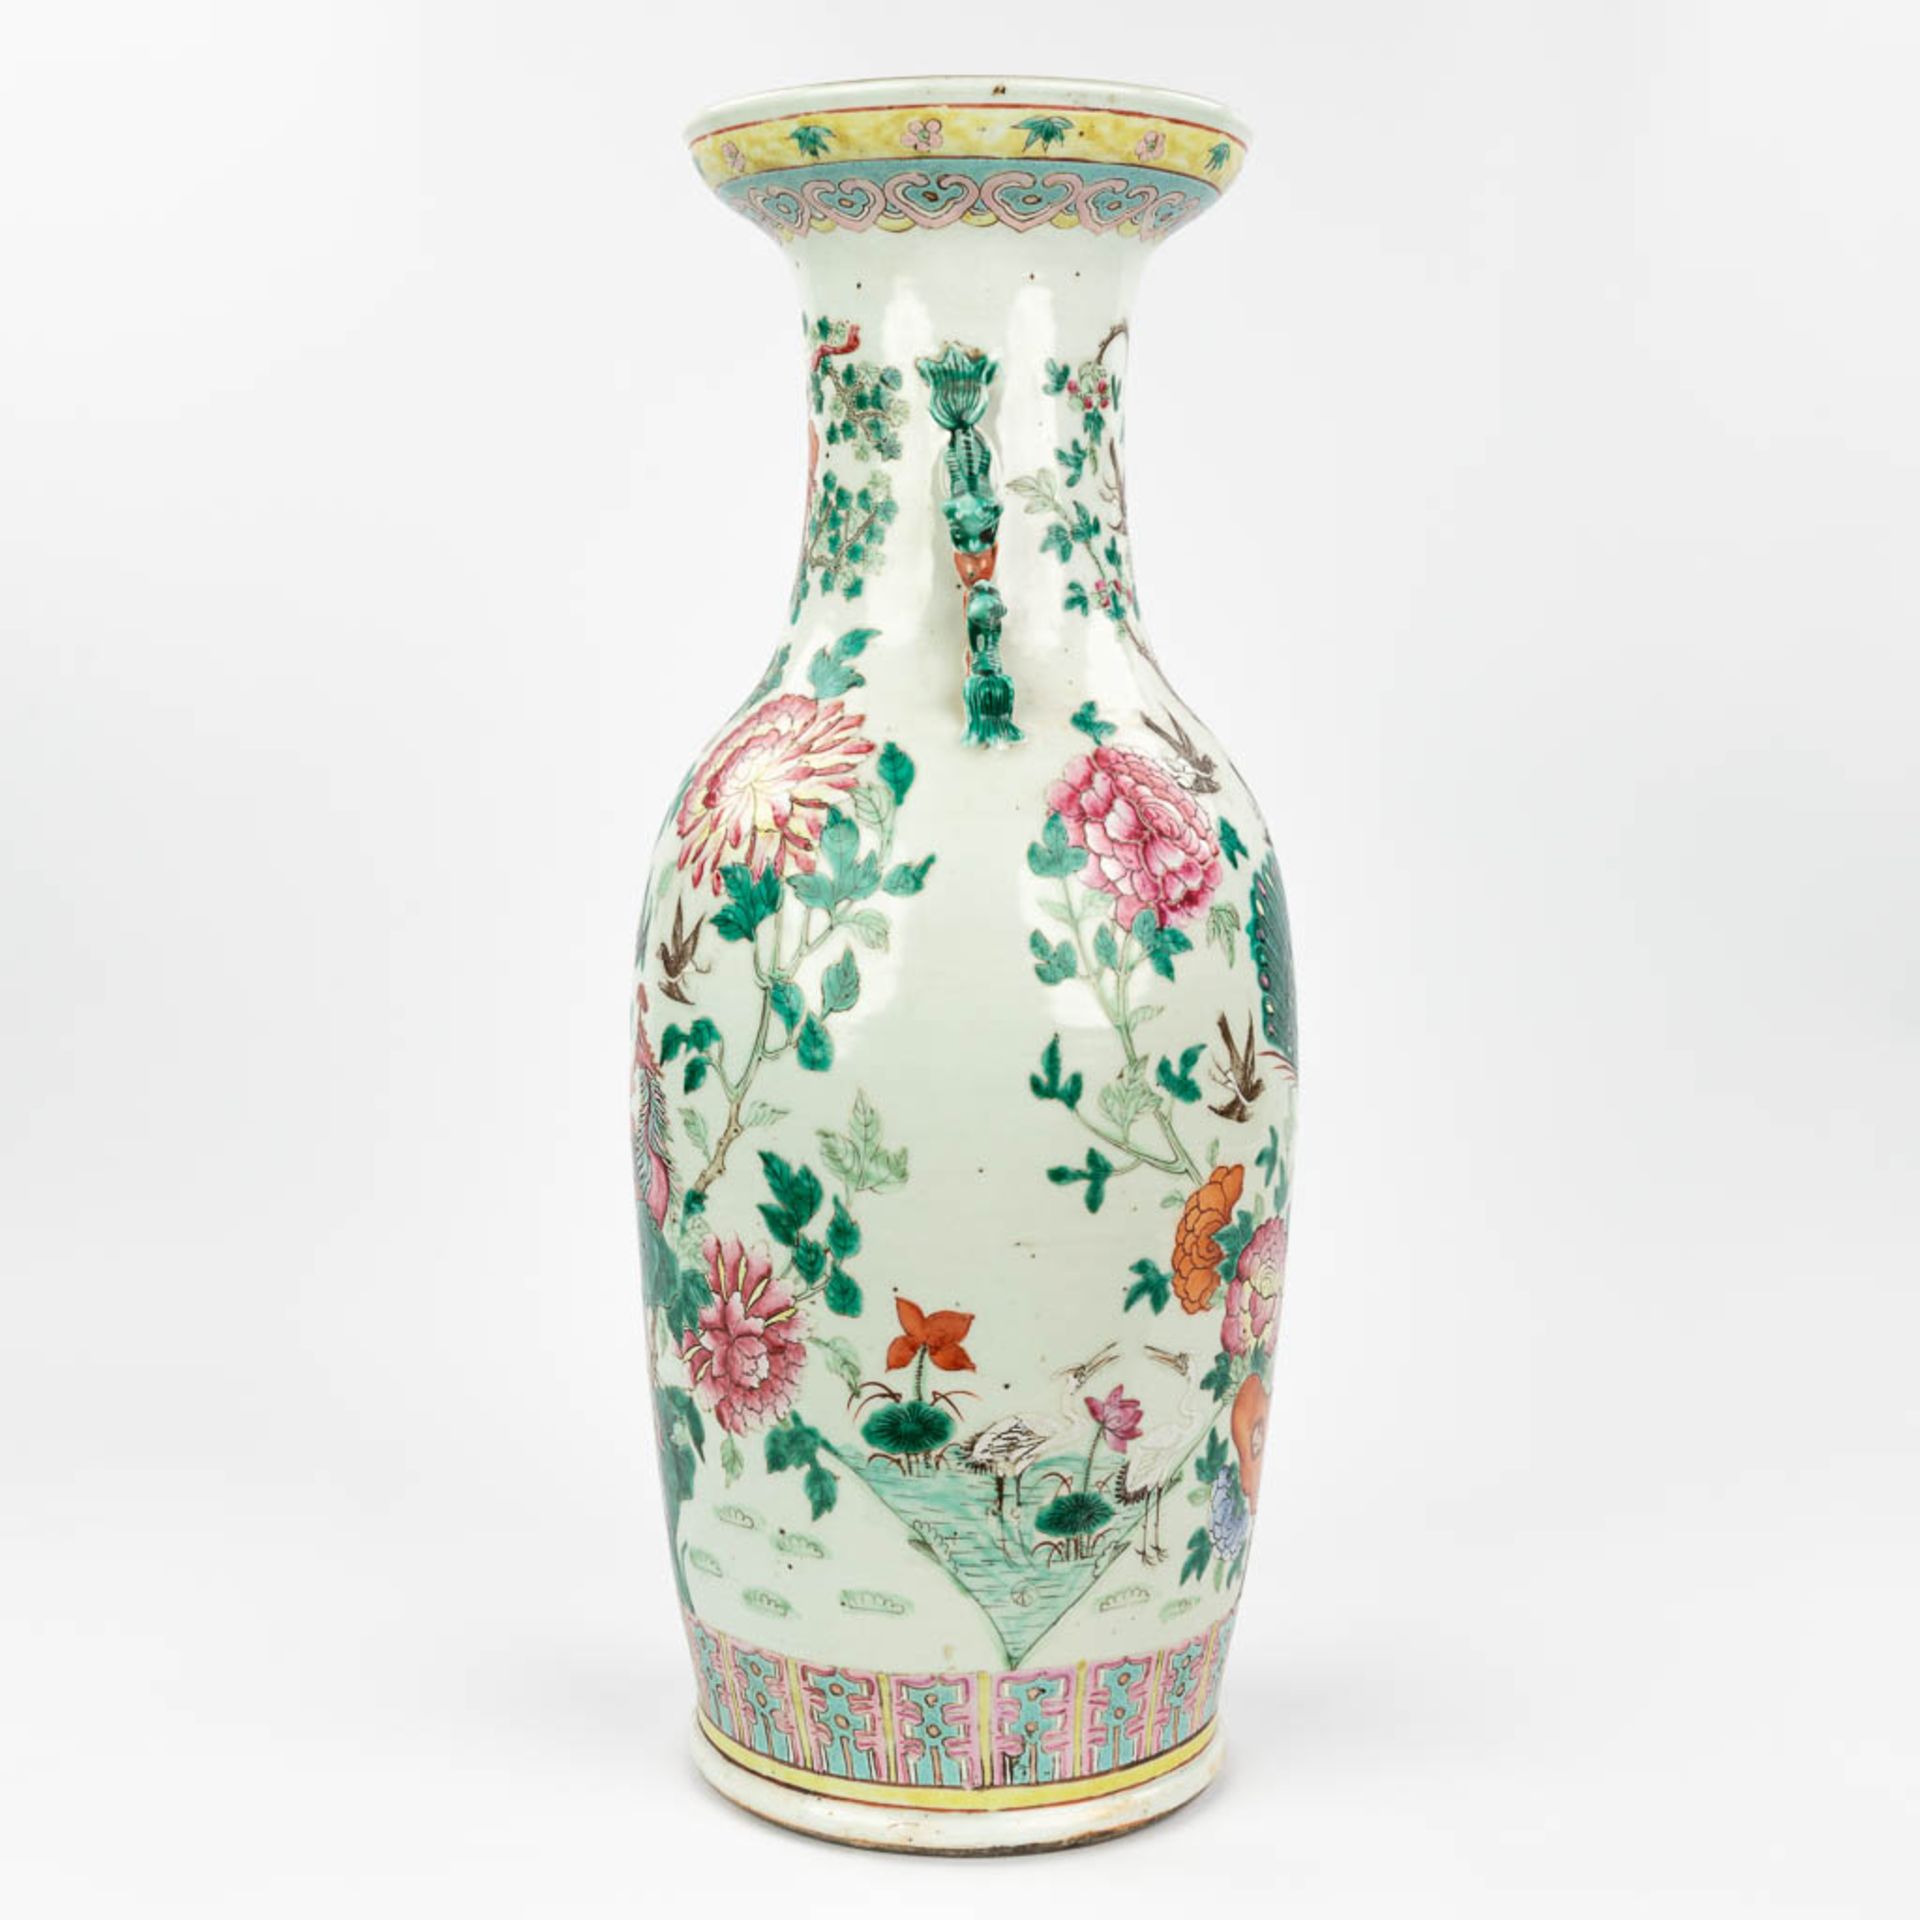 A Chinese vase made of porcelain, decorated with peacocks and birds. (61,5 x 24 cm) - Image 3 of 18